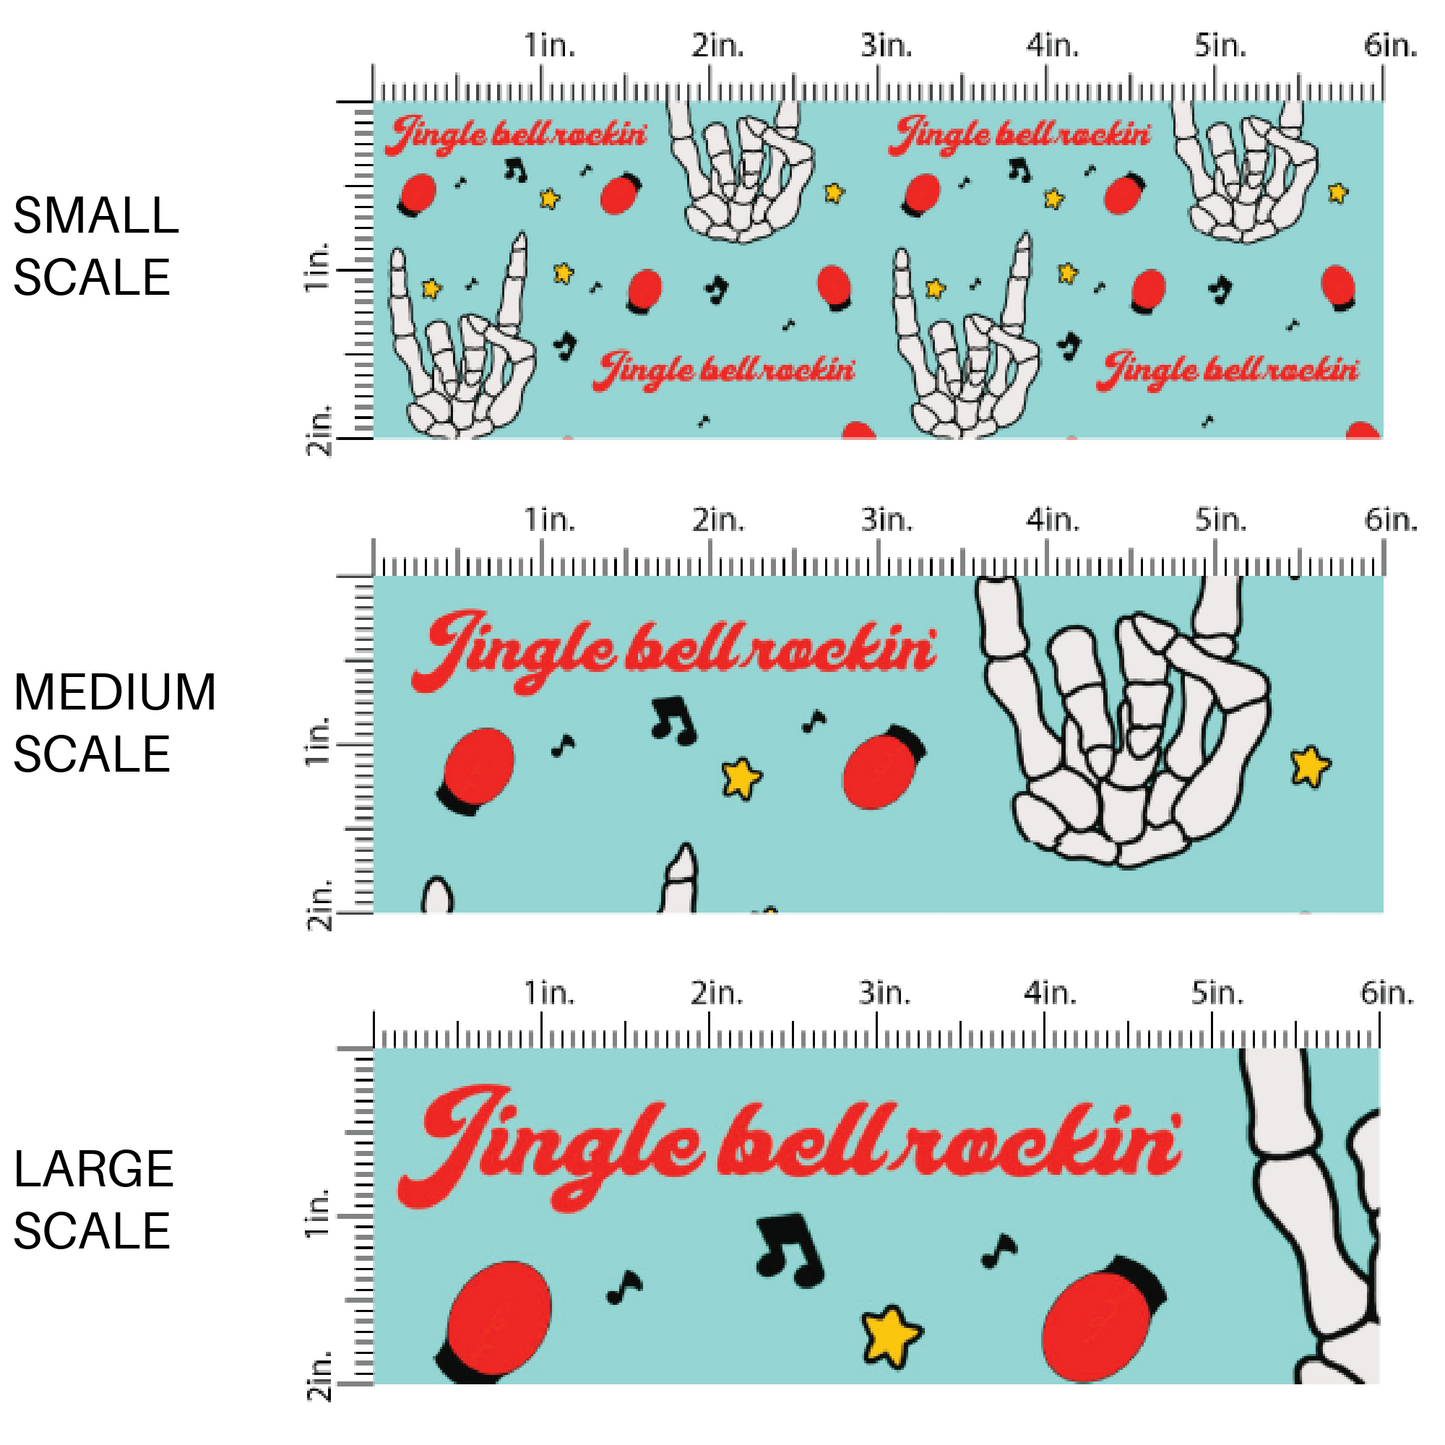 Aqua fabric by the yard scaled image guide with the phrase "Jingle Bell Rockin'", skeleton rock hands, and music notes.